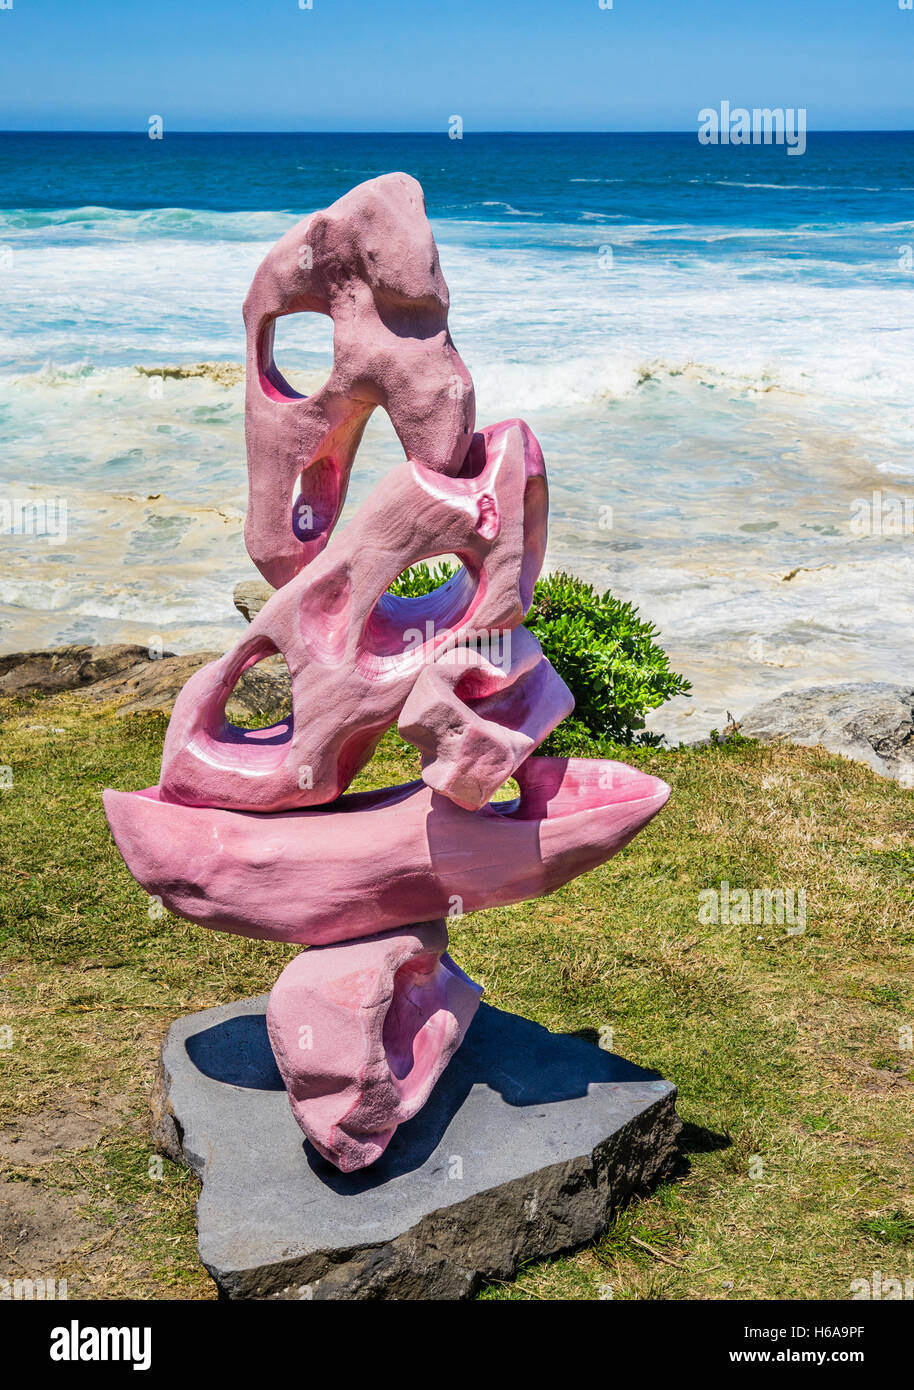 Bondi Beach, Sydney, Australia. 24th Oct, 2016. Sculpture by the Sea, Australia's largest annual outdoor sculpture exhibition along the coastal walk from Bondi Beach to Tamarama Beach. Sculpture titled 'Knucklebones' by Christabel Wigley Credit:  Manfred Gottschalk/Alamy Live News Stock Photo